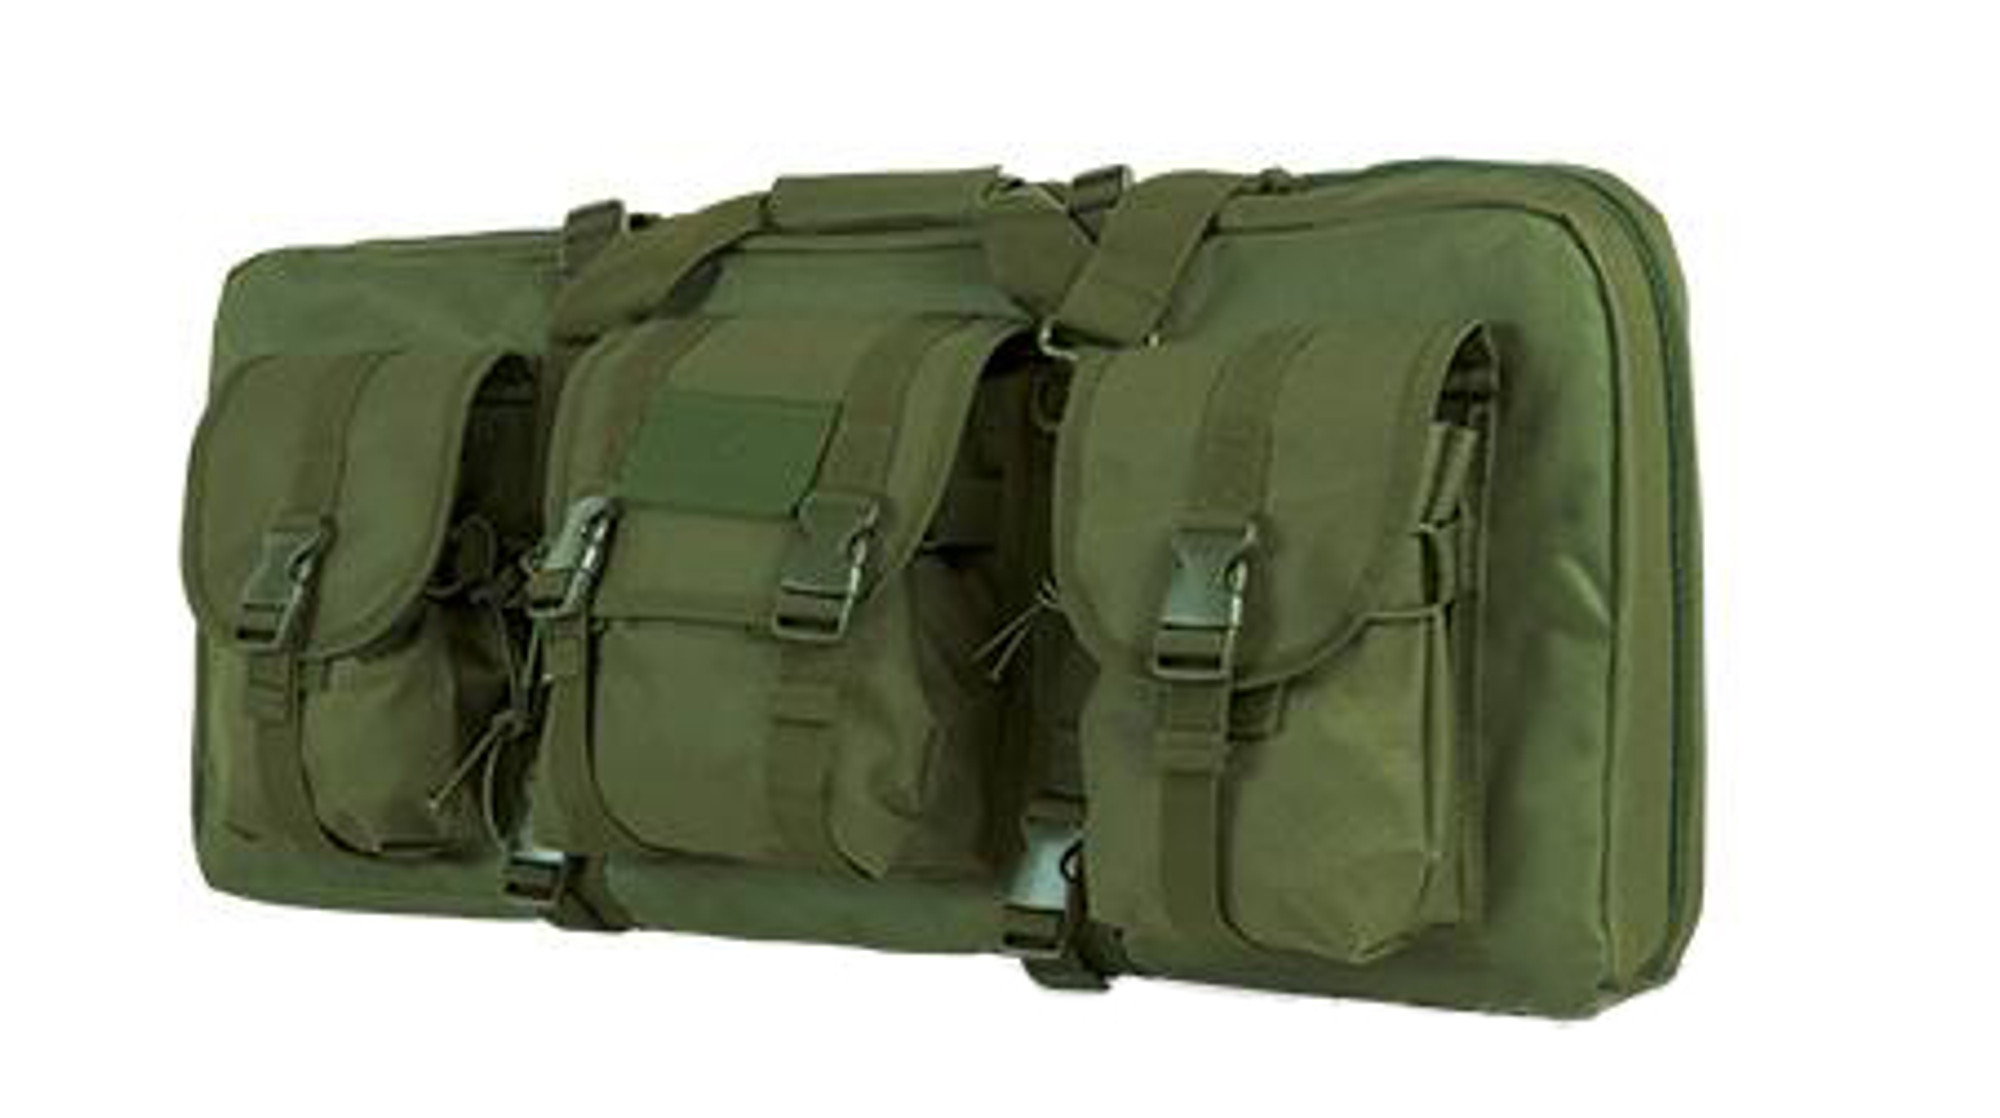 NcStar / VISM 28" Deluxe Dual Compartment Subgun / SBR Padded Carrying Bag / Case - OD Green